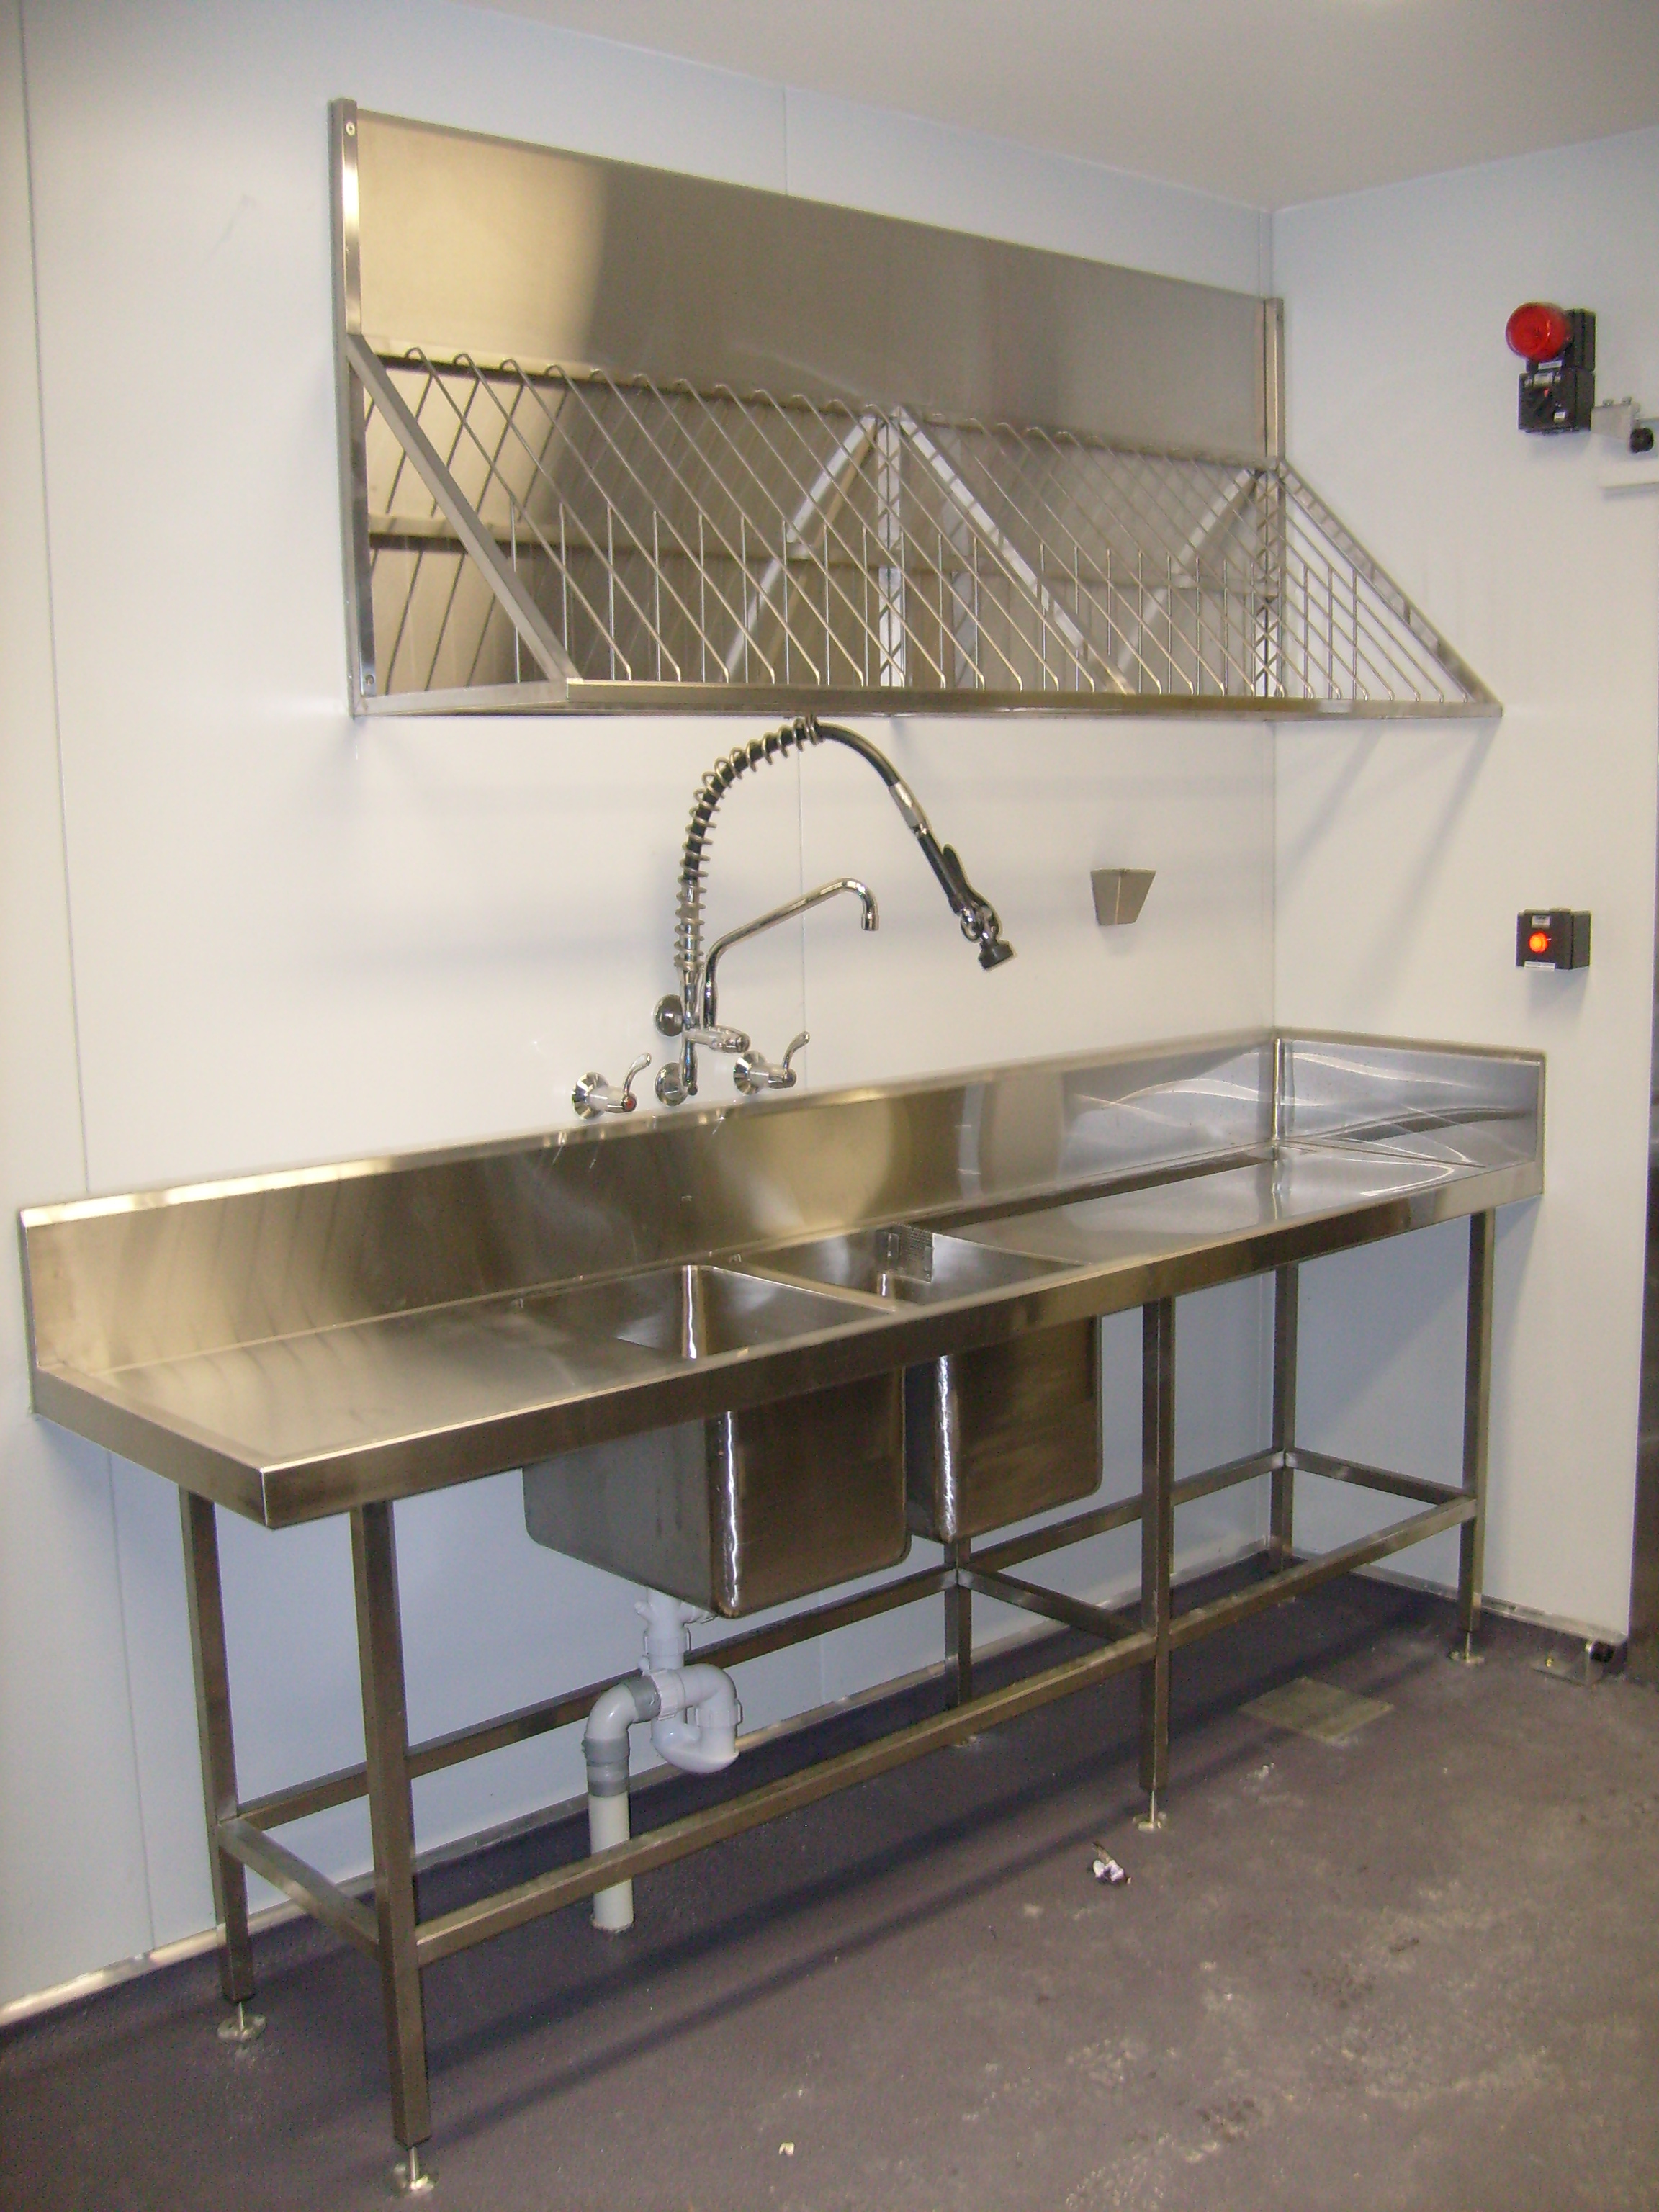 Buy a Commercial Stainless Steel Sink or Bowl in Melbourne ControlFab